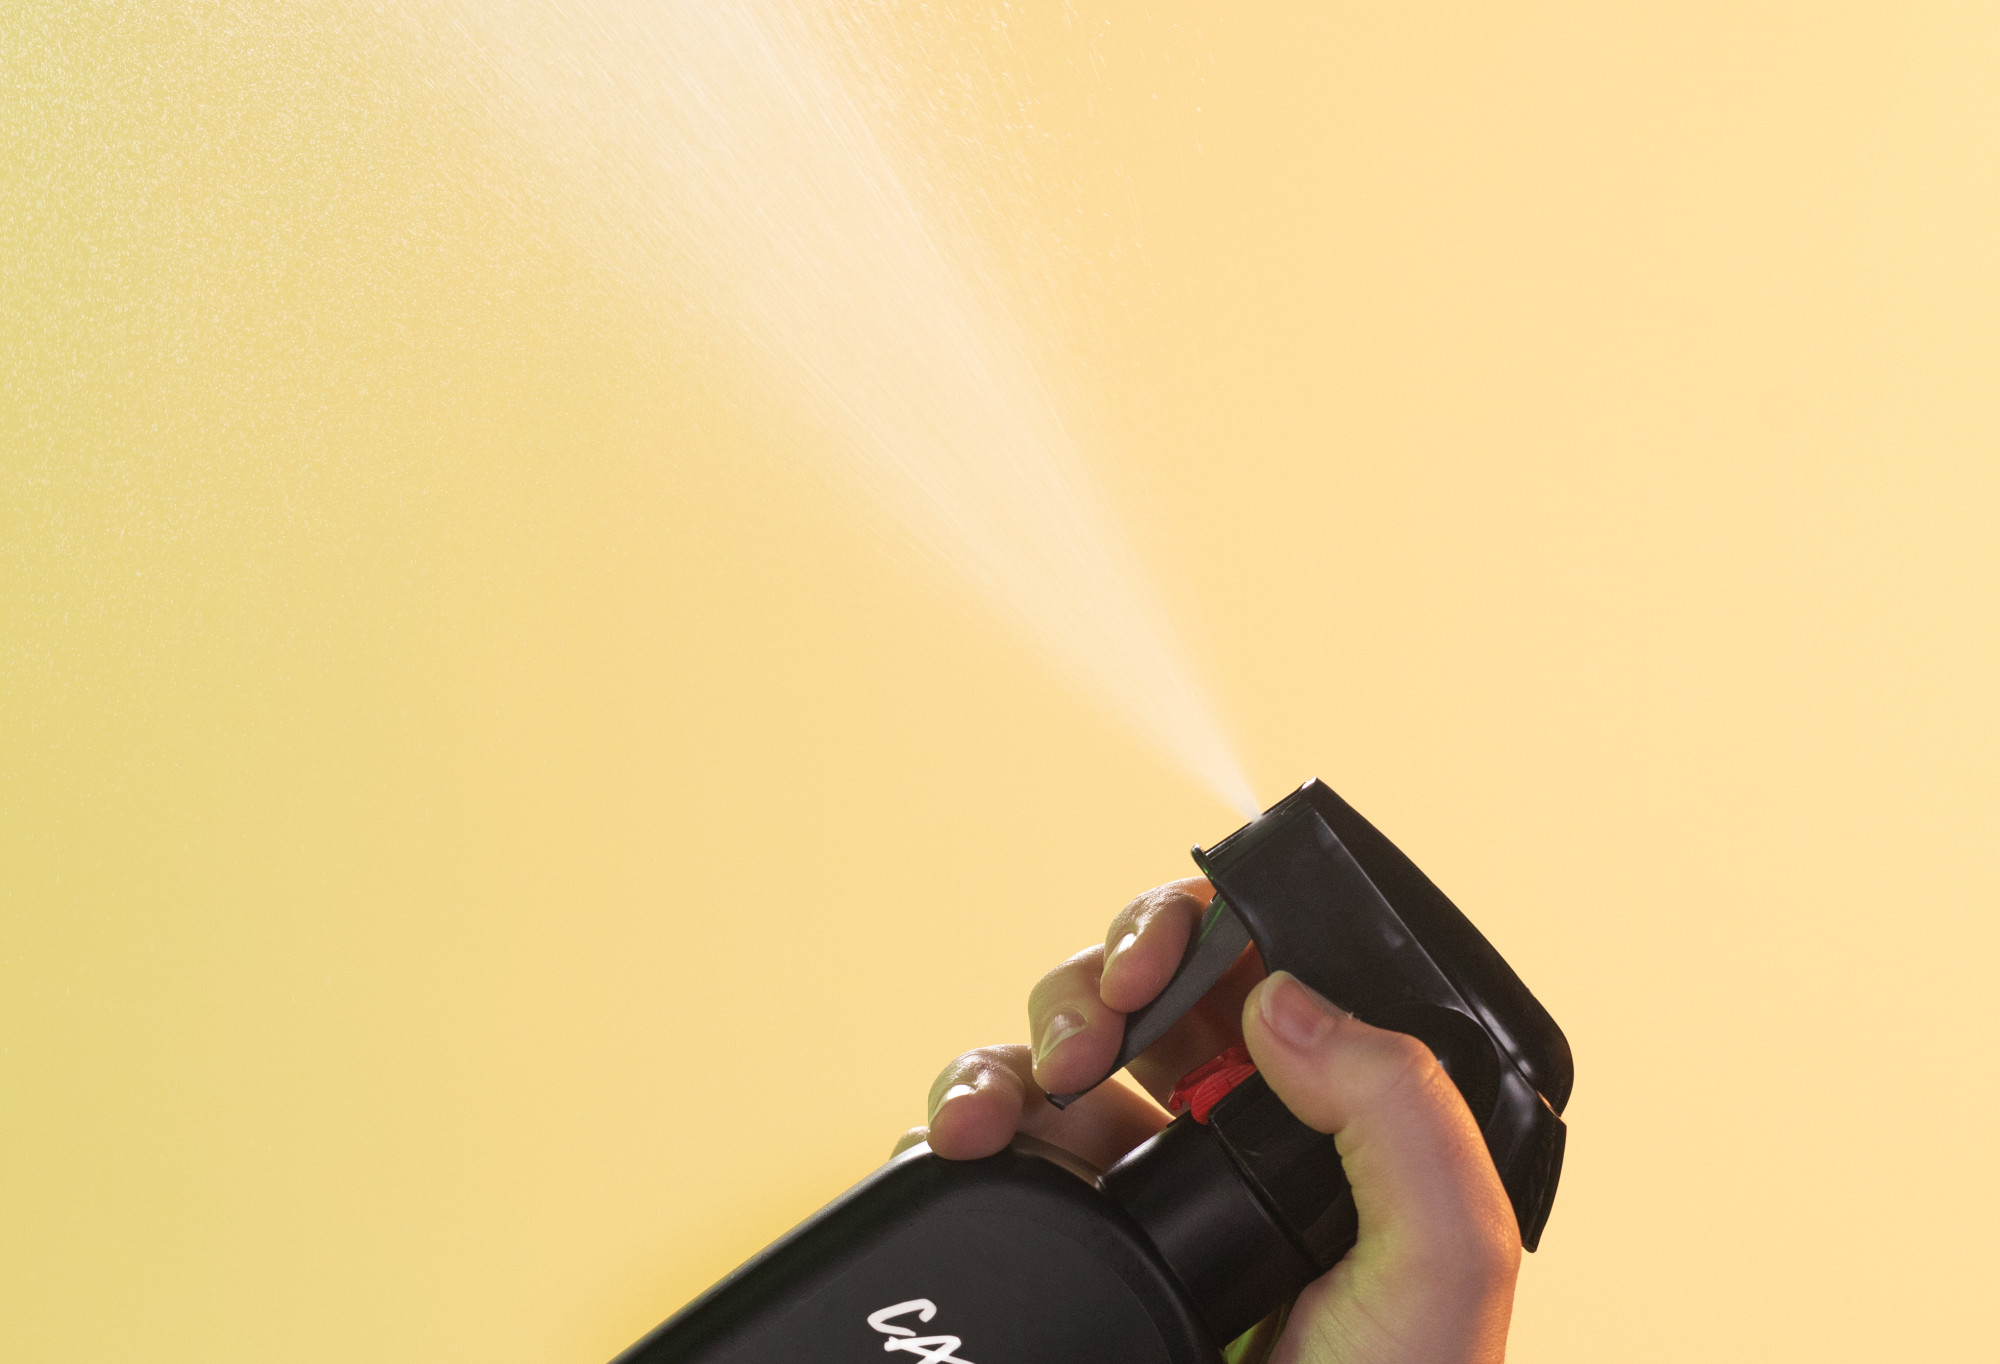 Zesty body spray is sprayed up into the air, in front of a bright, buttery yellow background.